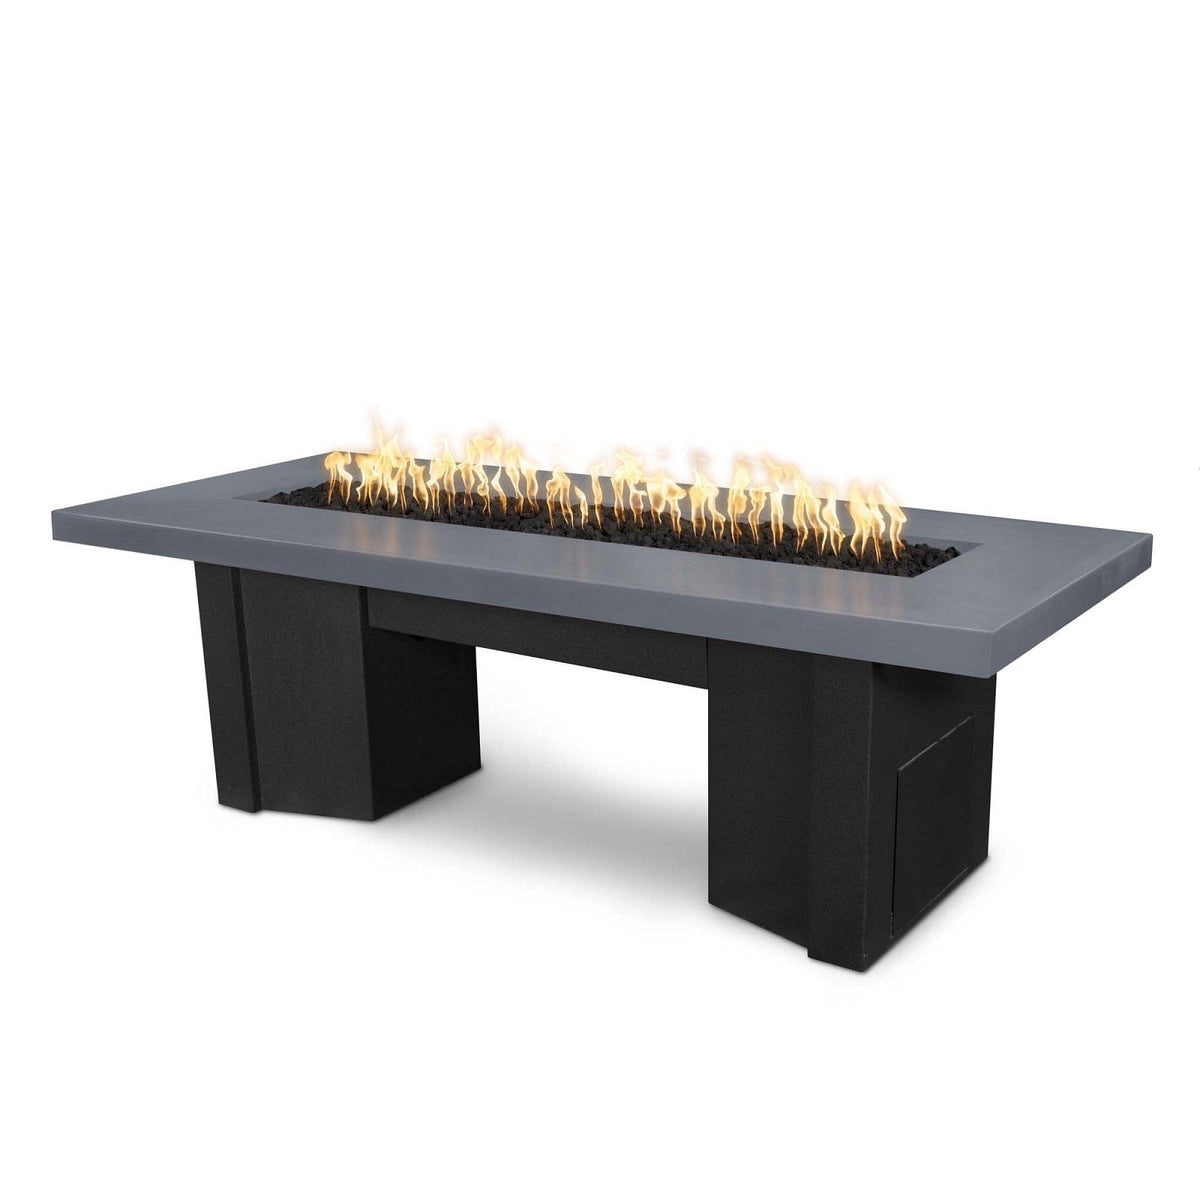 The Outdoor Plus Fire Features Gray (-GRY) / Black Powder Coated Steel (-BLK) The Outdoor Plus 78&quot; Alameda Fire Table Smooth Concrete in Liquid Propane - Flame Sense System with Push Button Spark Igniter / OPT-ALMGFRC78FSEN-LP